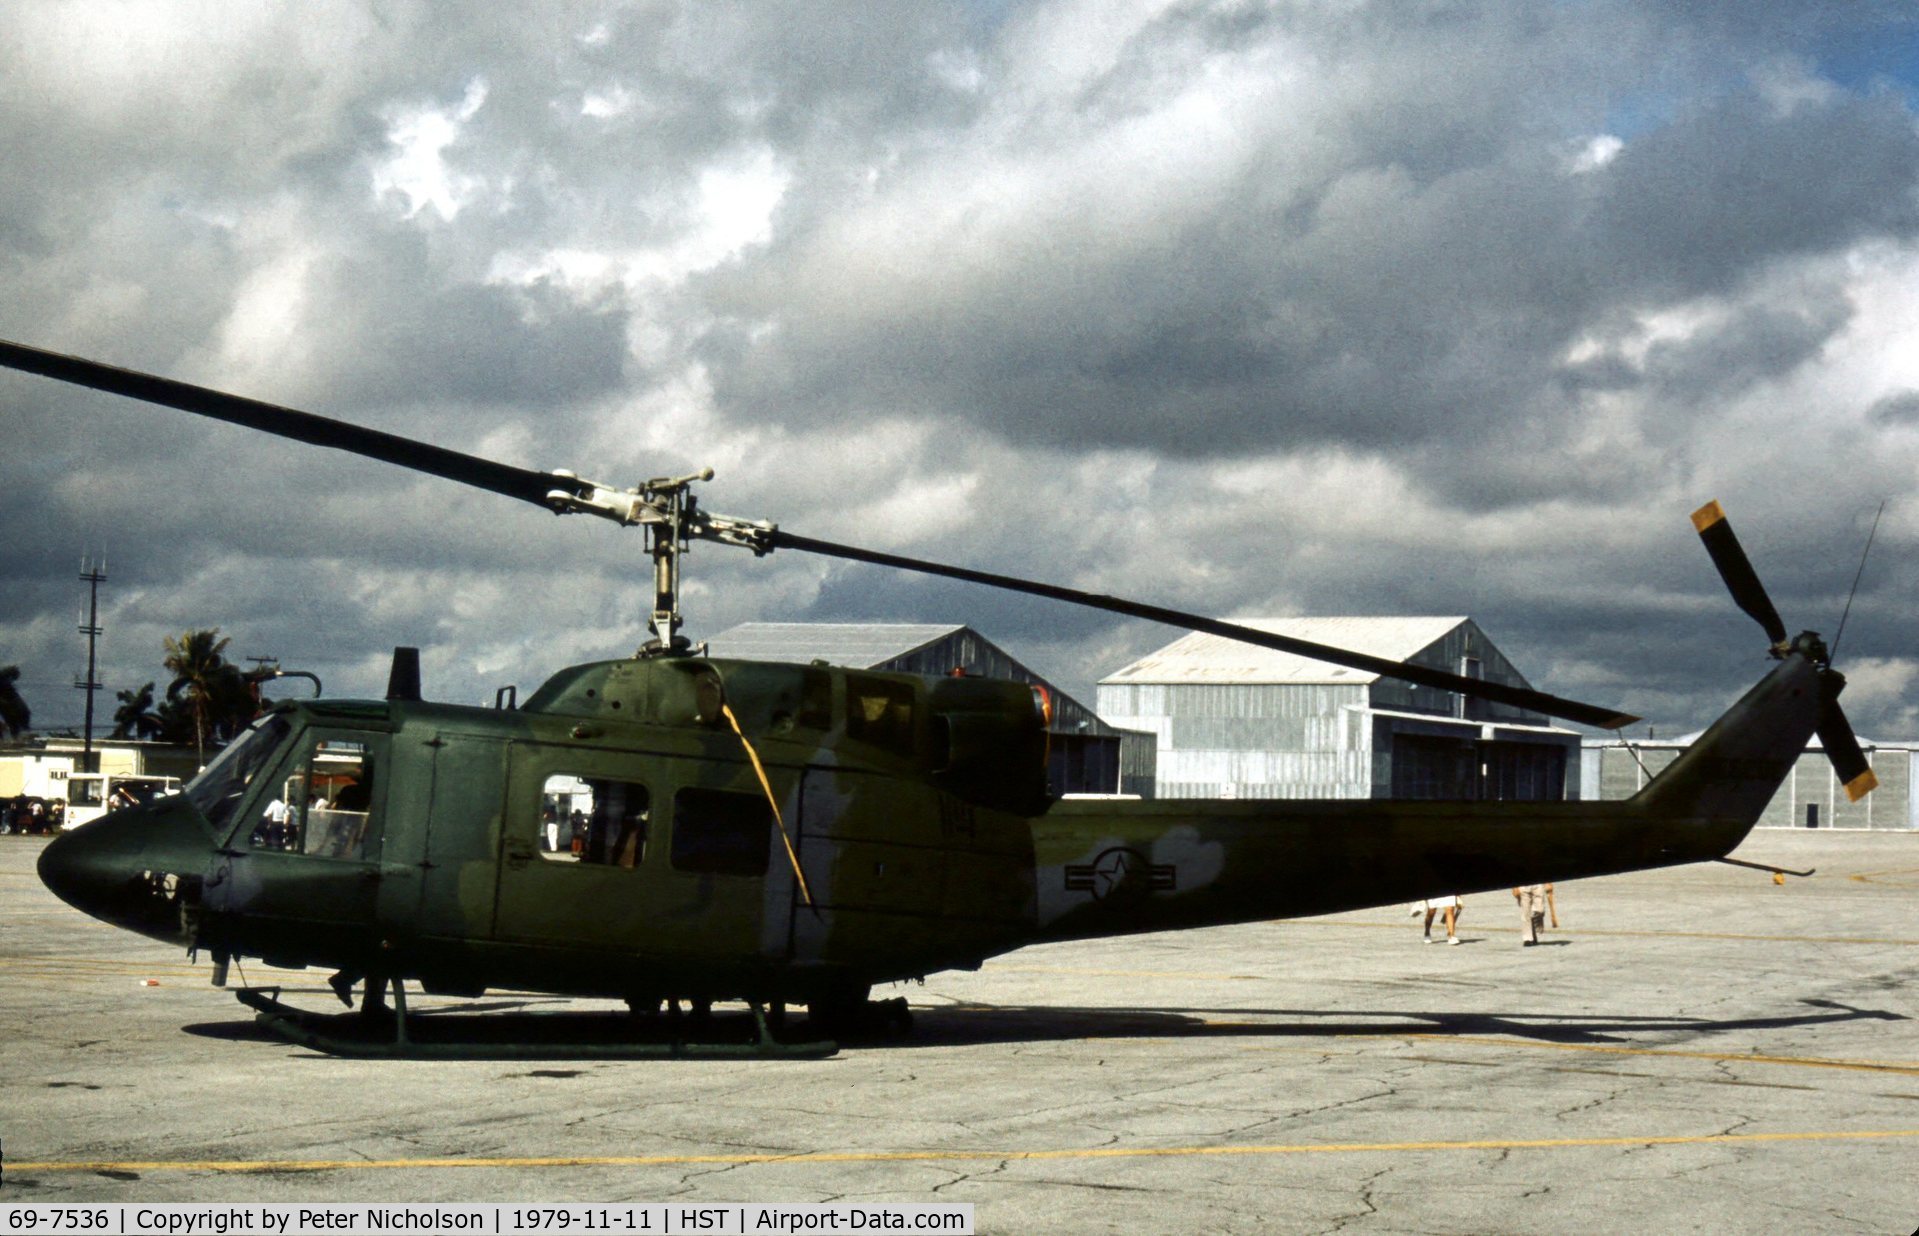 69-7536, 1969 Bell UH-1N-BF  Iroquois C/N 31077, UH-1N Iroquois of 38th Aerospace Rescue & Recovery Squadron at the 1979 Homestead AFB Open House.